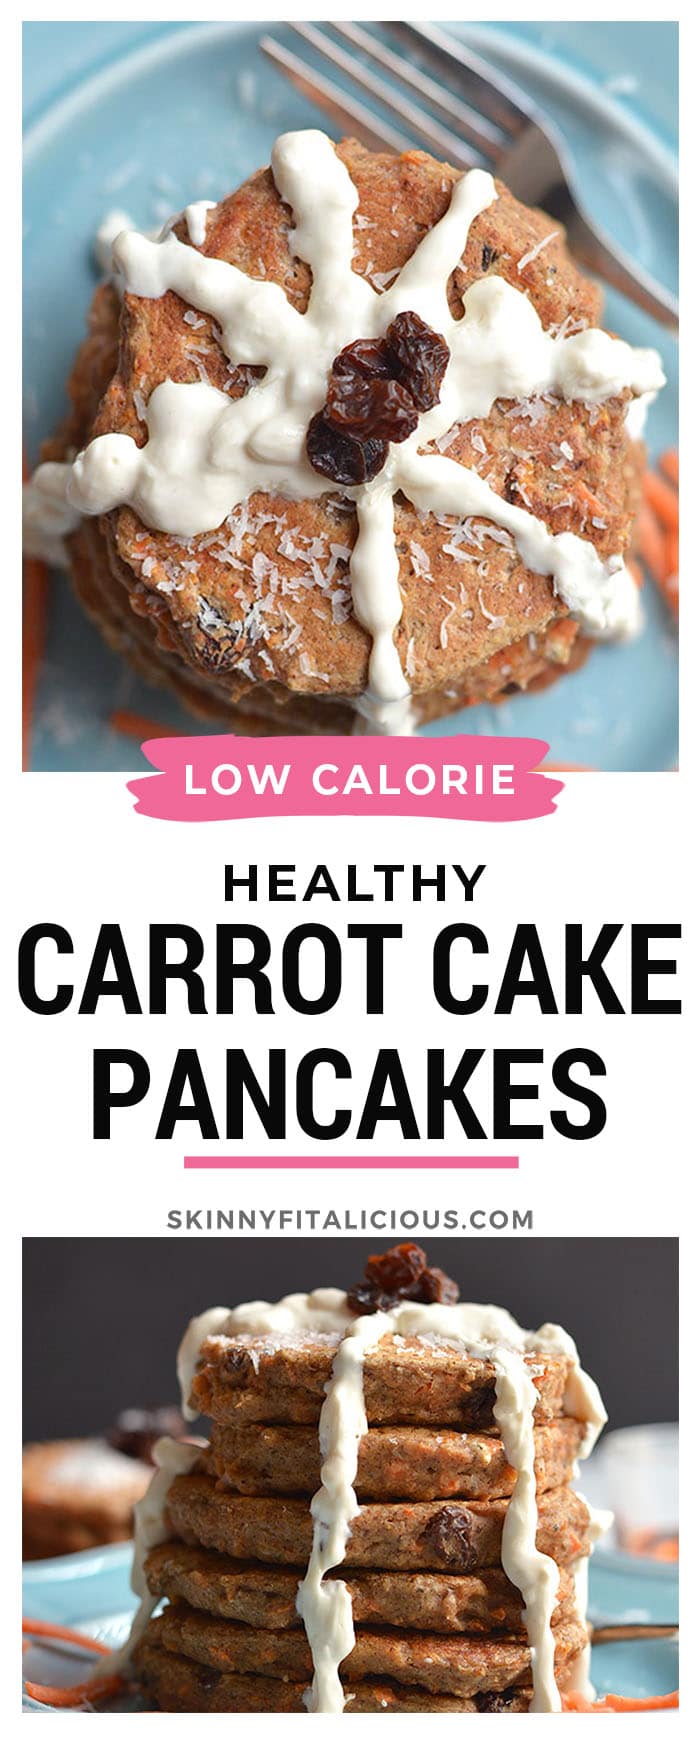 Healthy Carrot Cake Pancakes! These moist, mildly spiced pancakes taste like real carrot cake only in breakfast form and better for you too! Gluten Free + Low Calorie